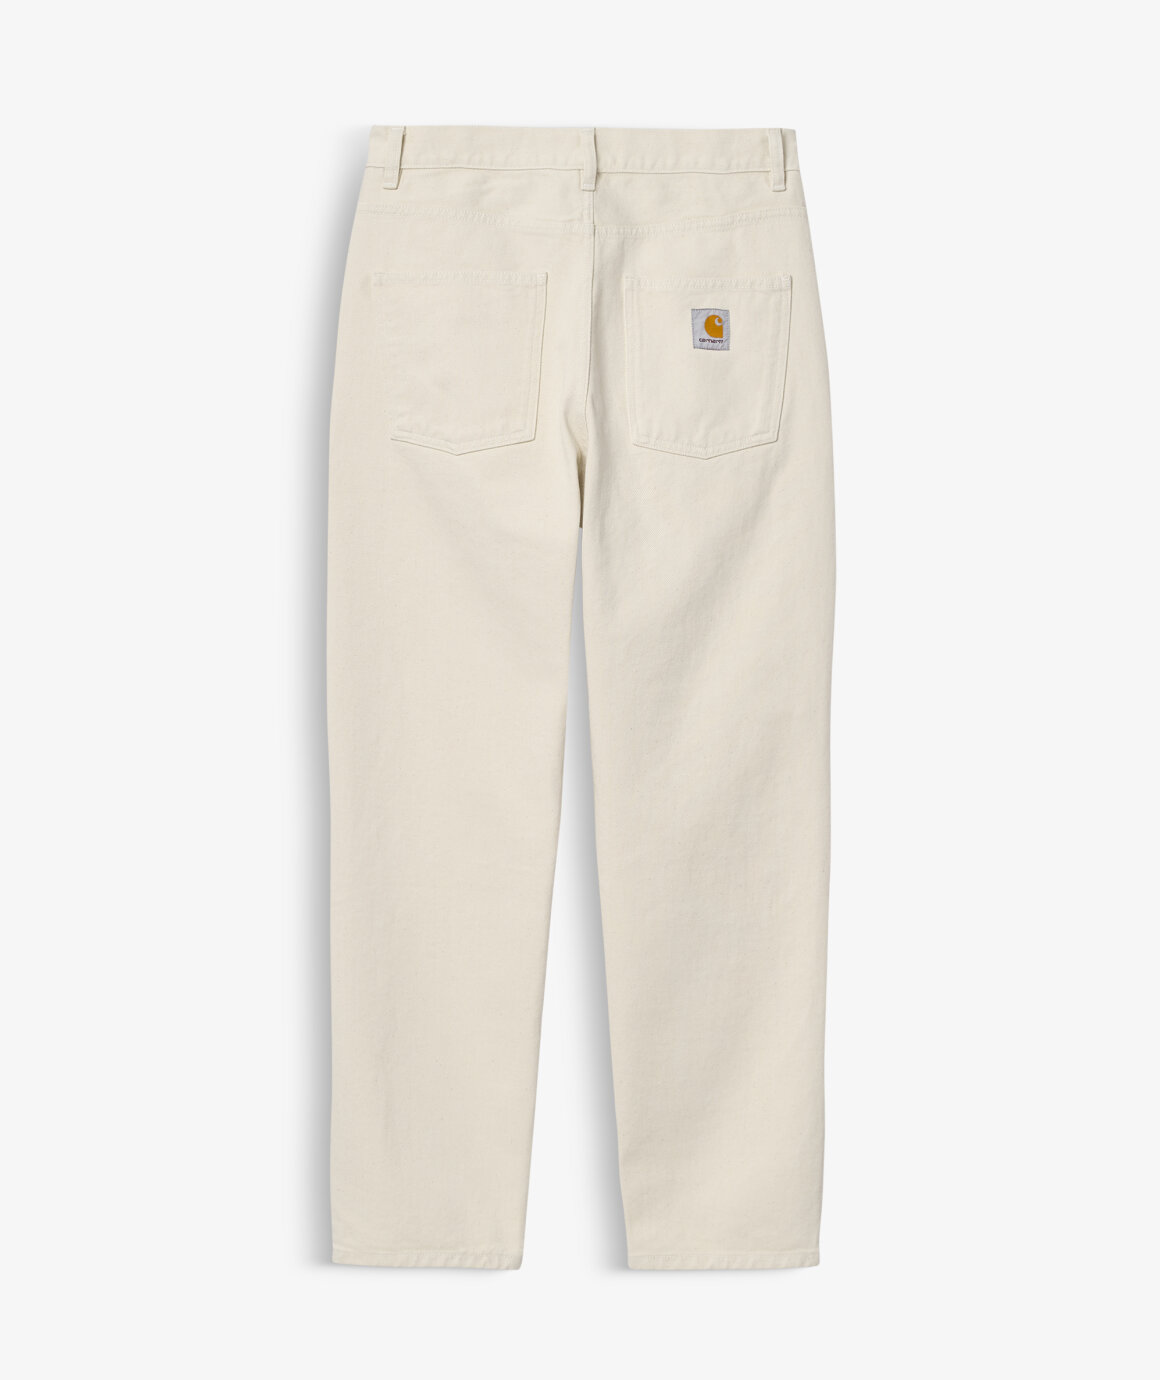 Norse Store | Shipping Worldwide - Carhartt Newel Pant - Natural Stone Wash